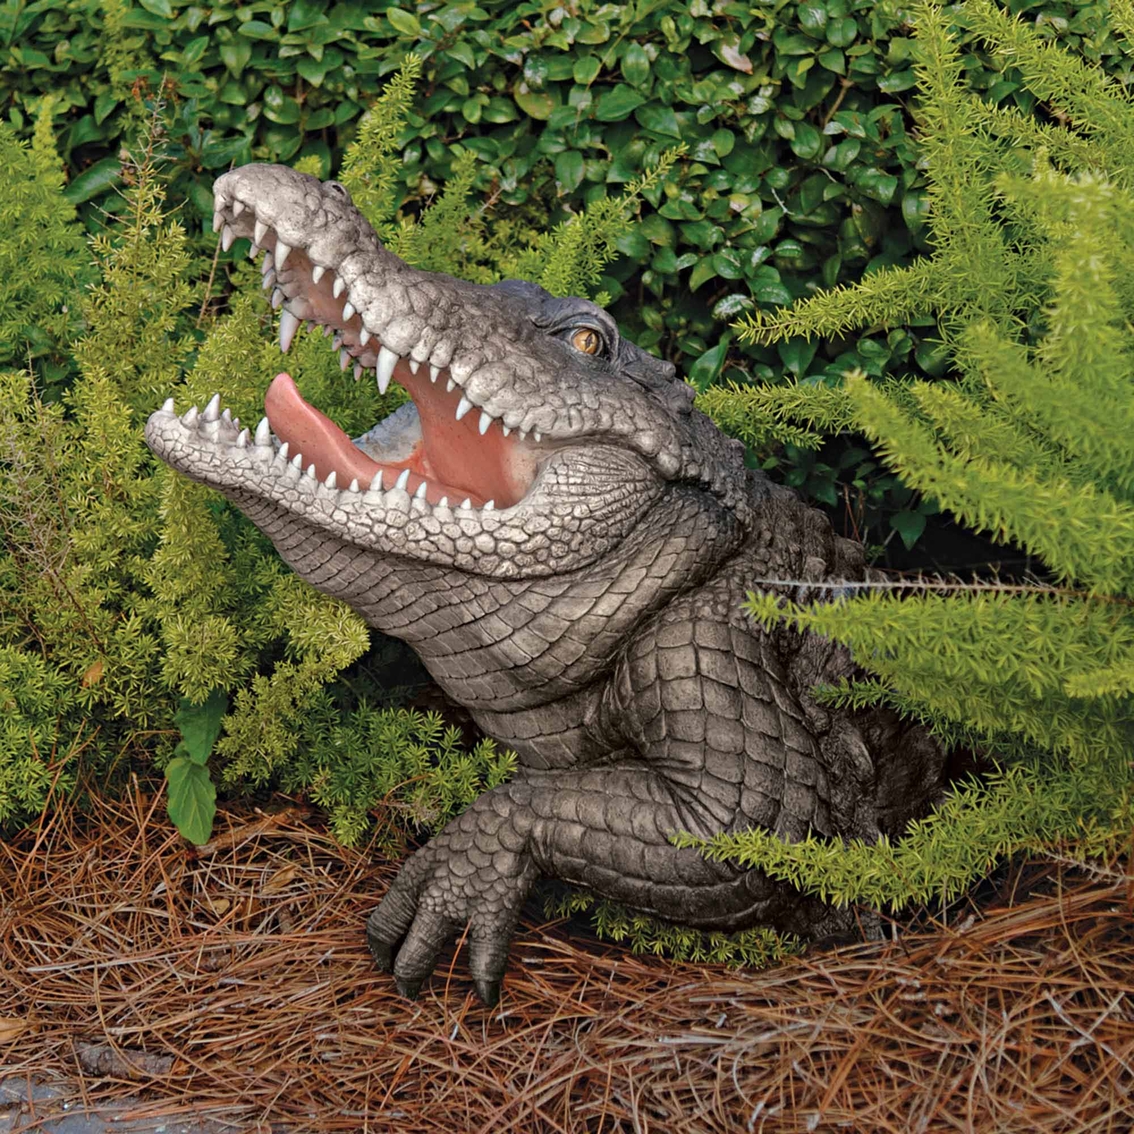 Design Toscano Snapping Swamp Gator Statue - Image 2 of 2